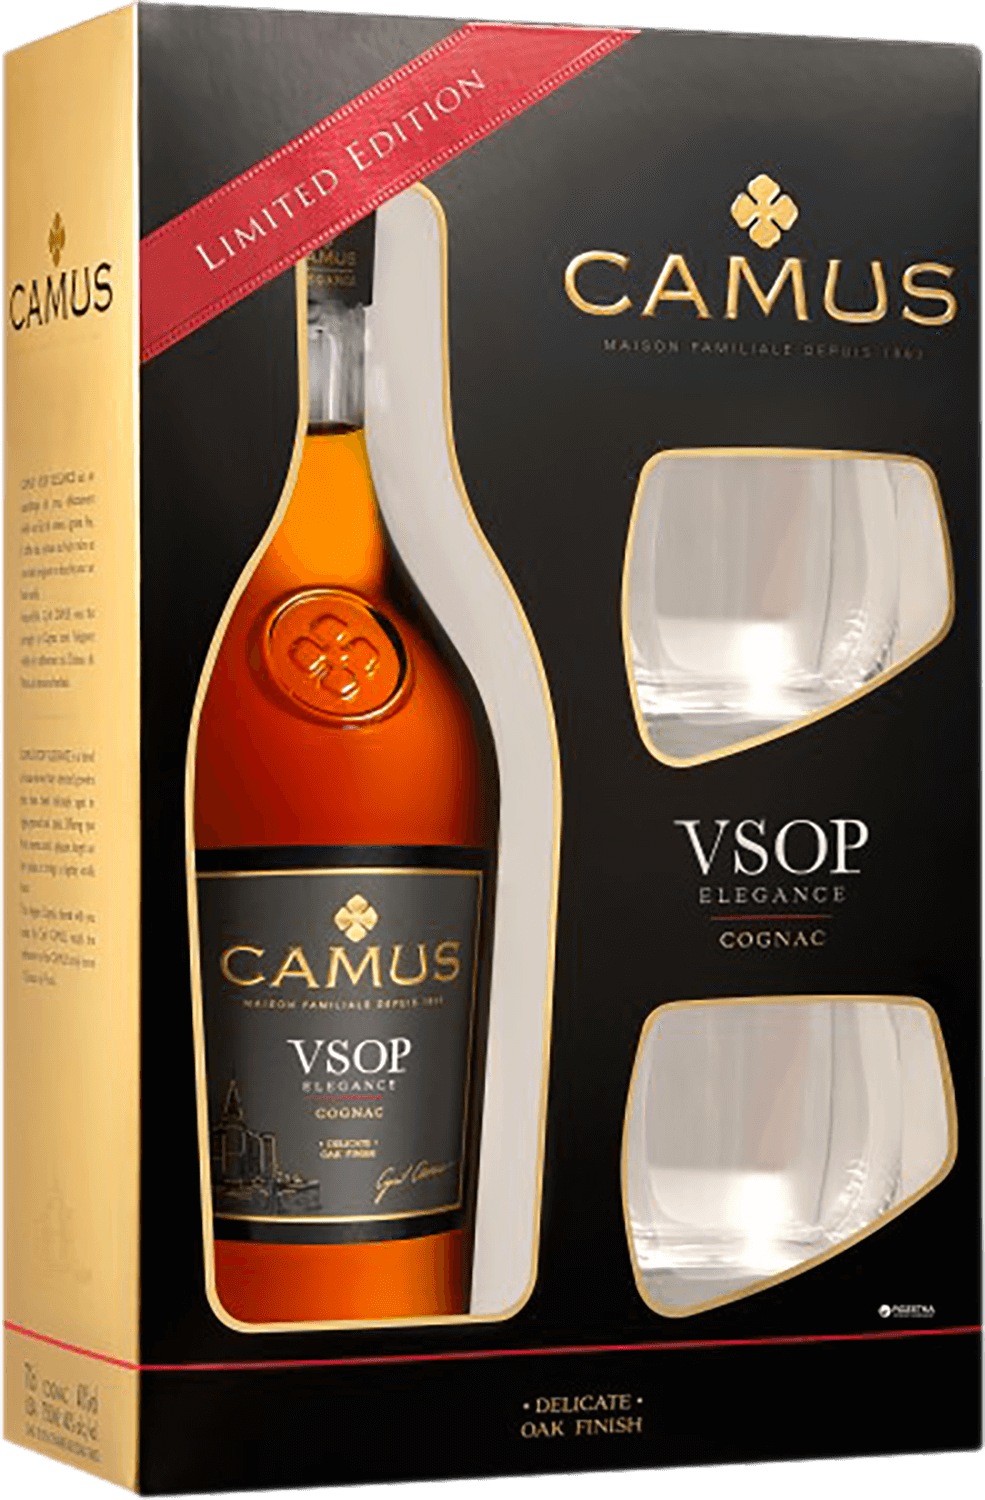 metaxa 7 stars gift box with two glasses Camus Elegance Cognac VSOP (gift box with two glasses)